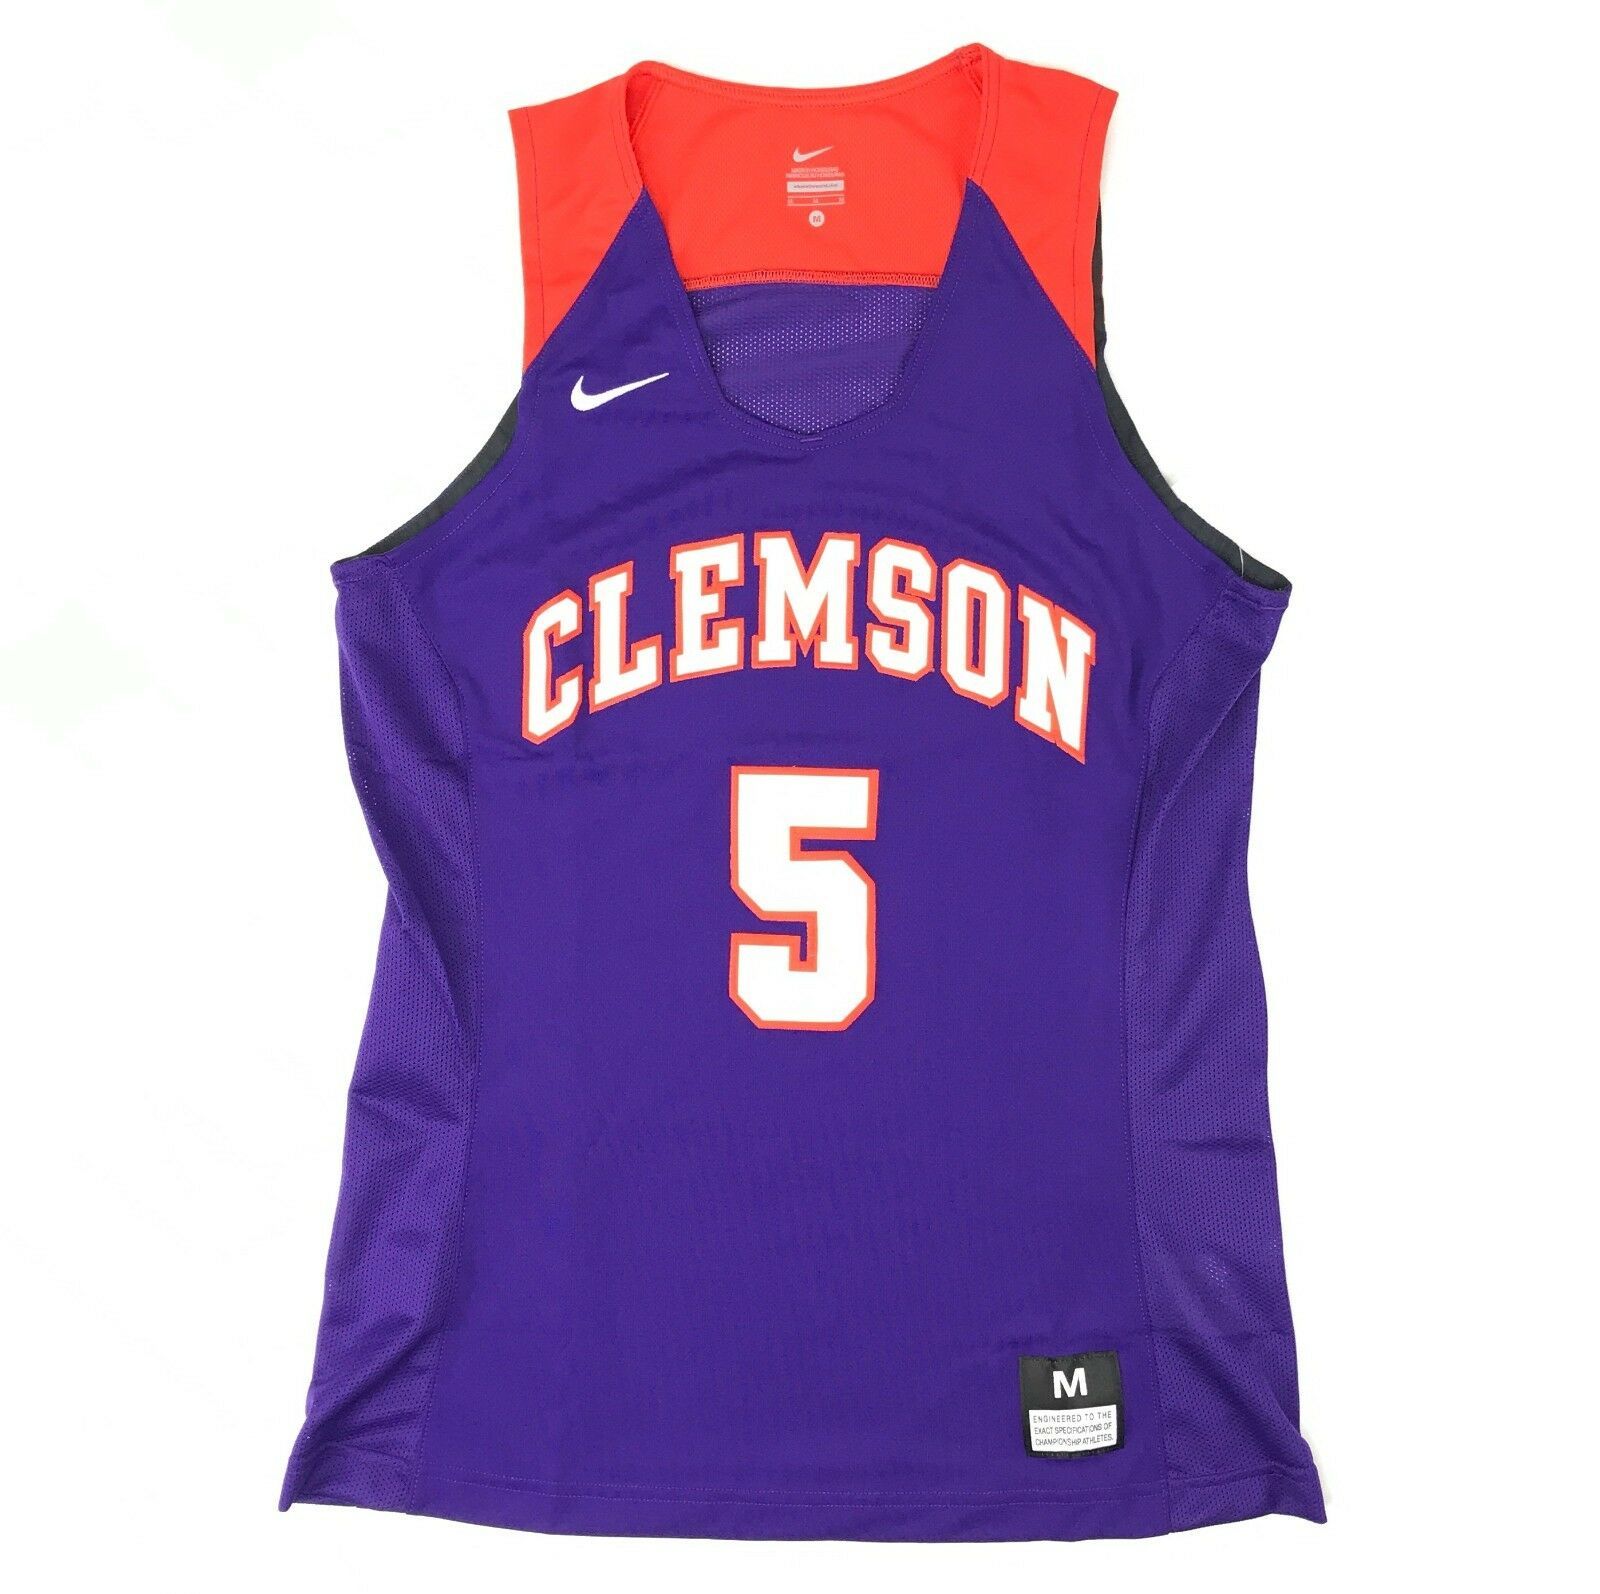 Primary image for Nike Clemson Tigers Elite Enforcer Basketball Jersey Women's M Purple #5 802337